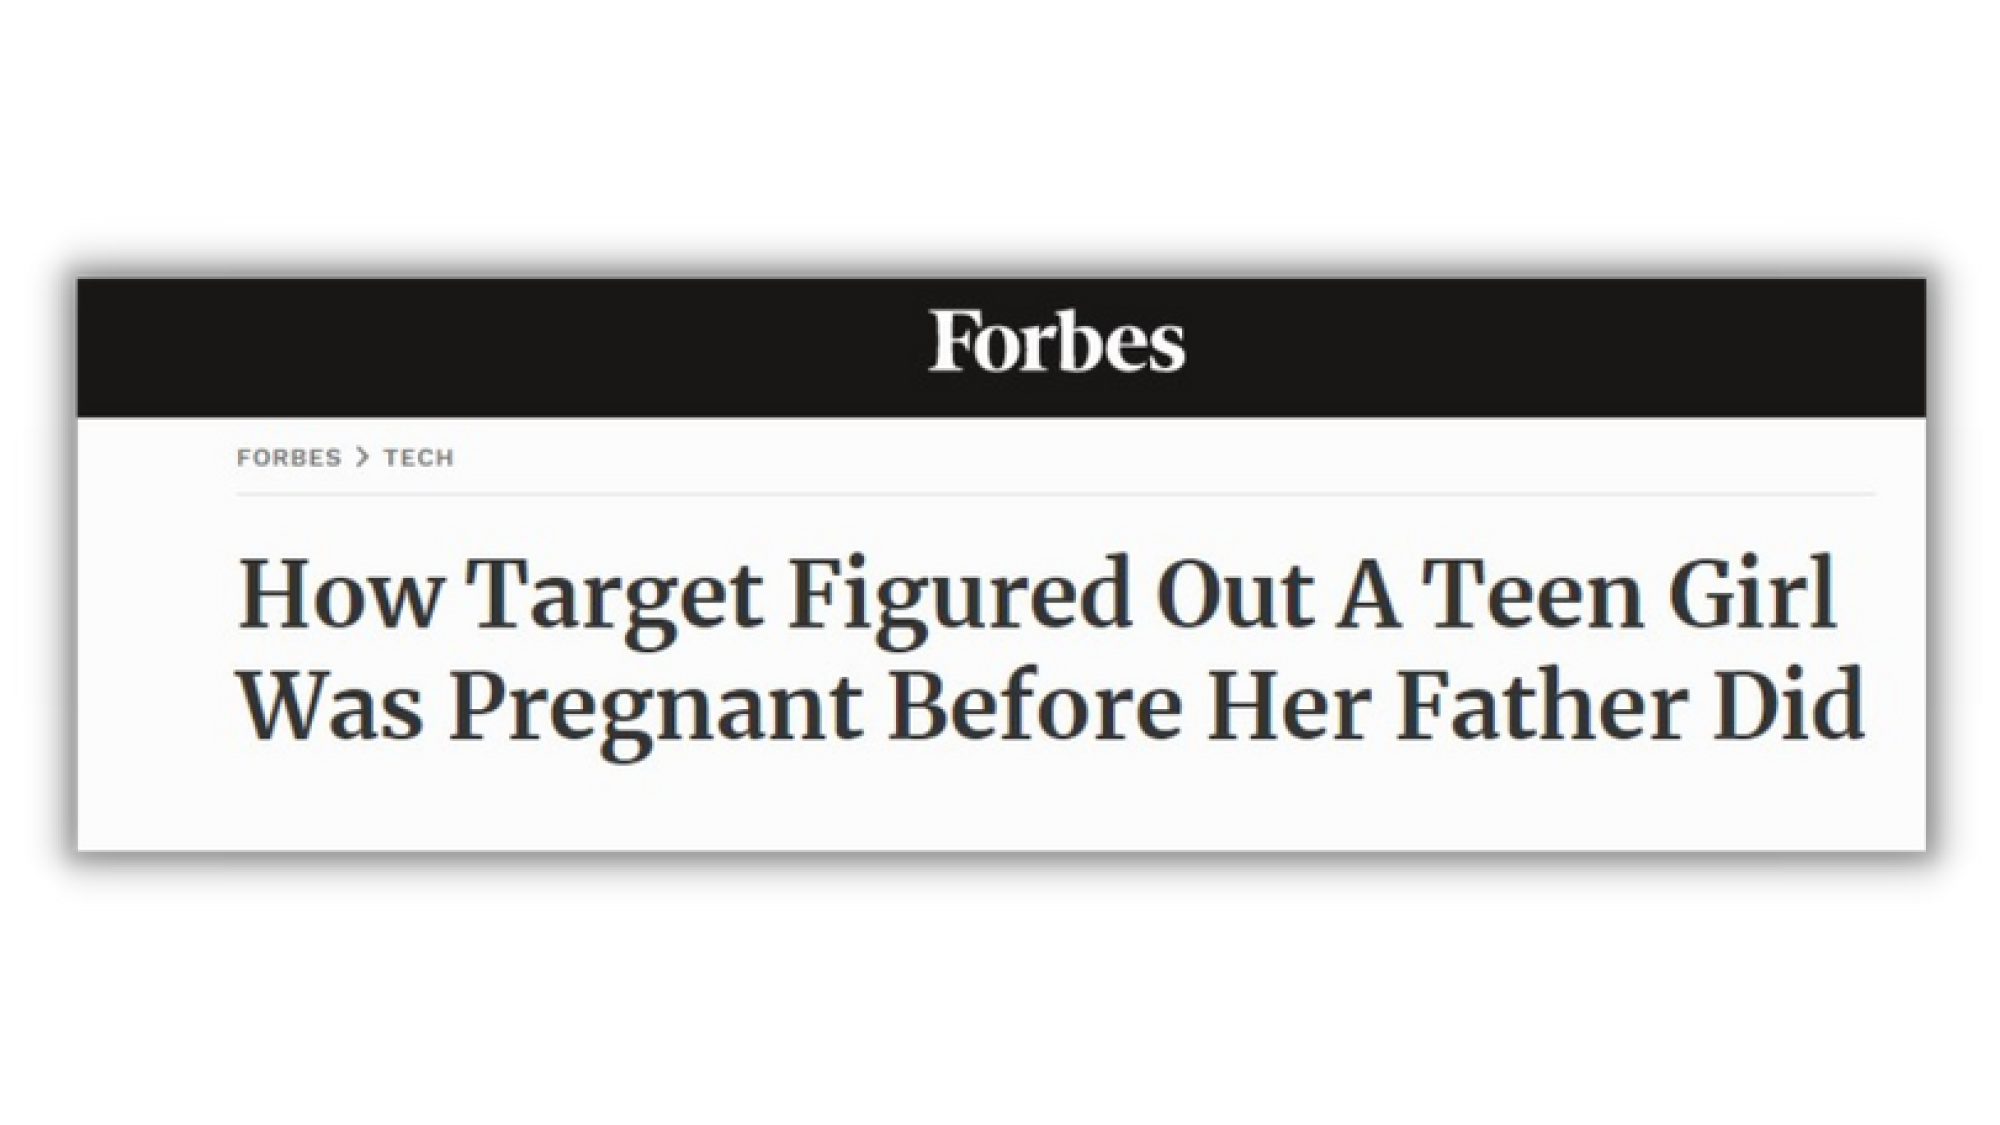 forbes article - target figured out a teen girl was pregnant before her father